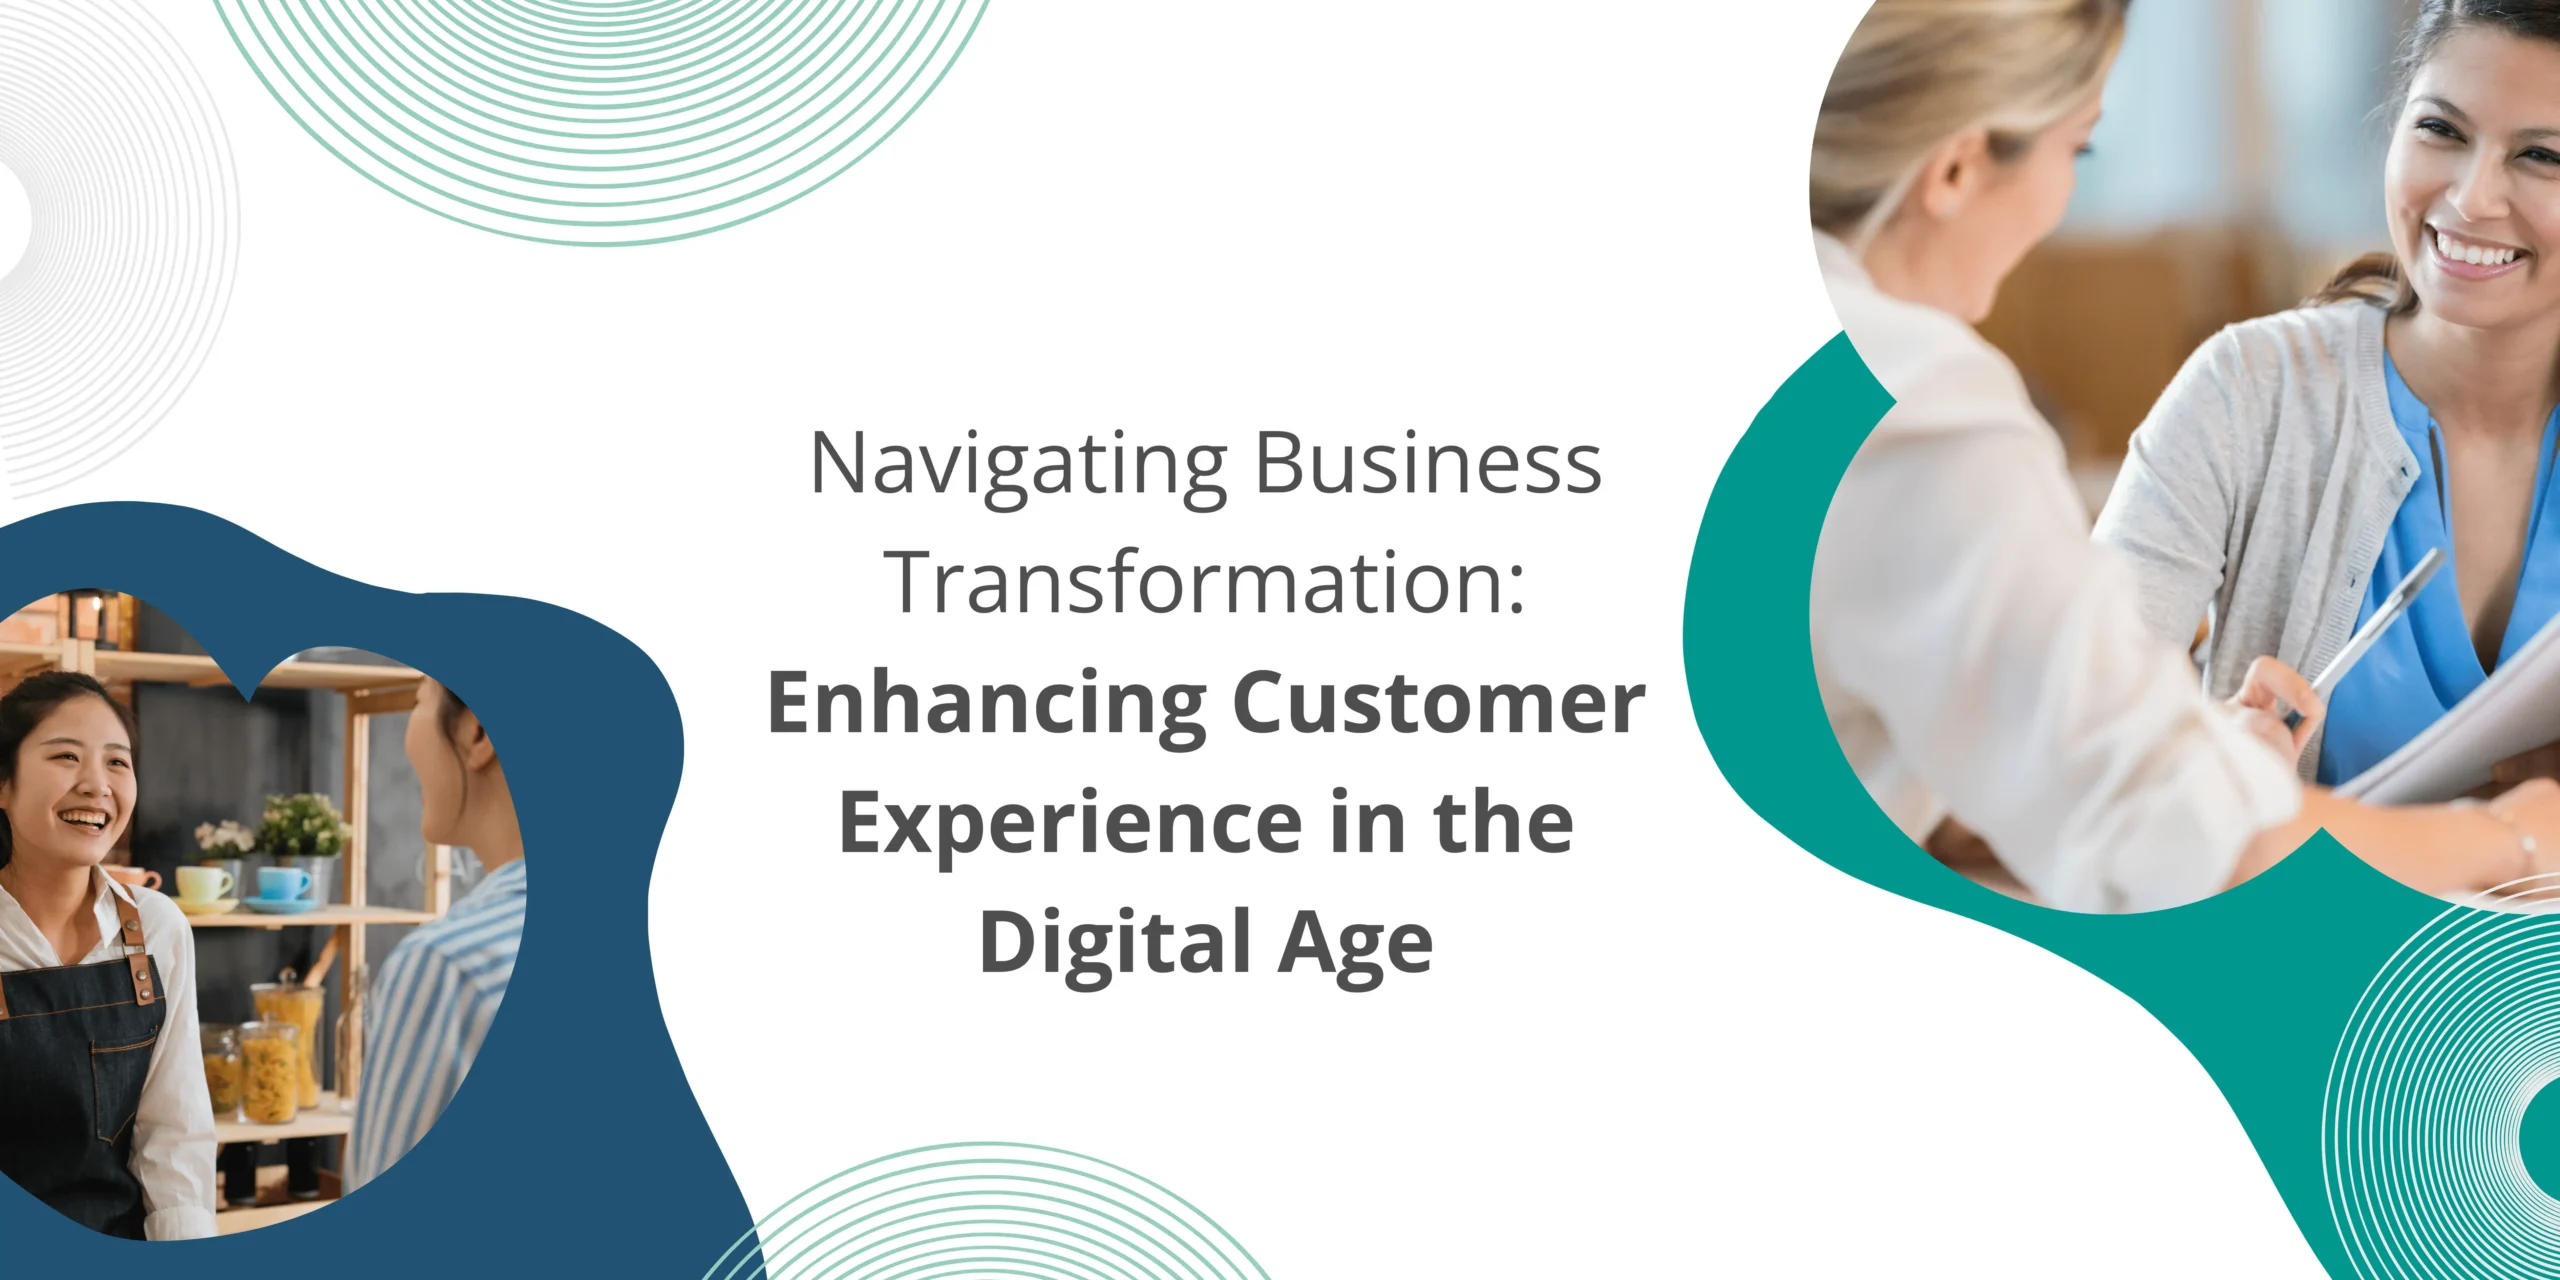 Navigating Business Transformation: Enhancing Customer Experience in the Digital Age